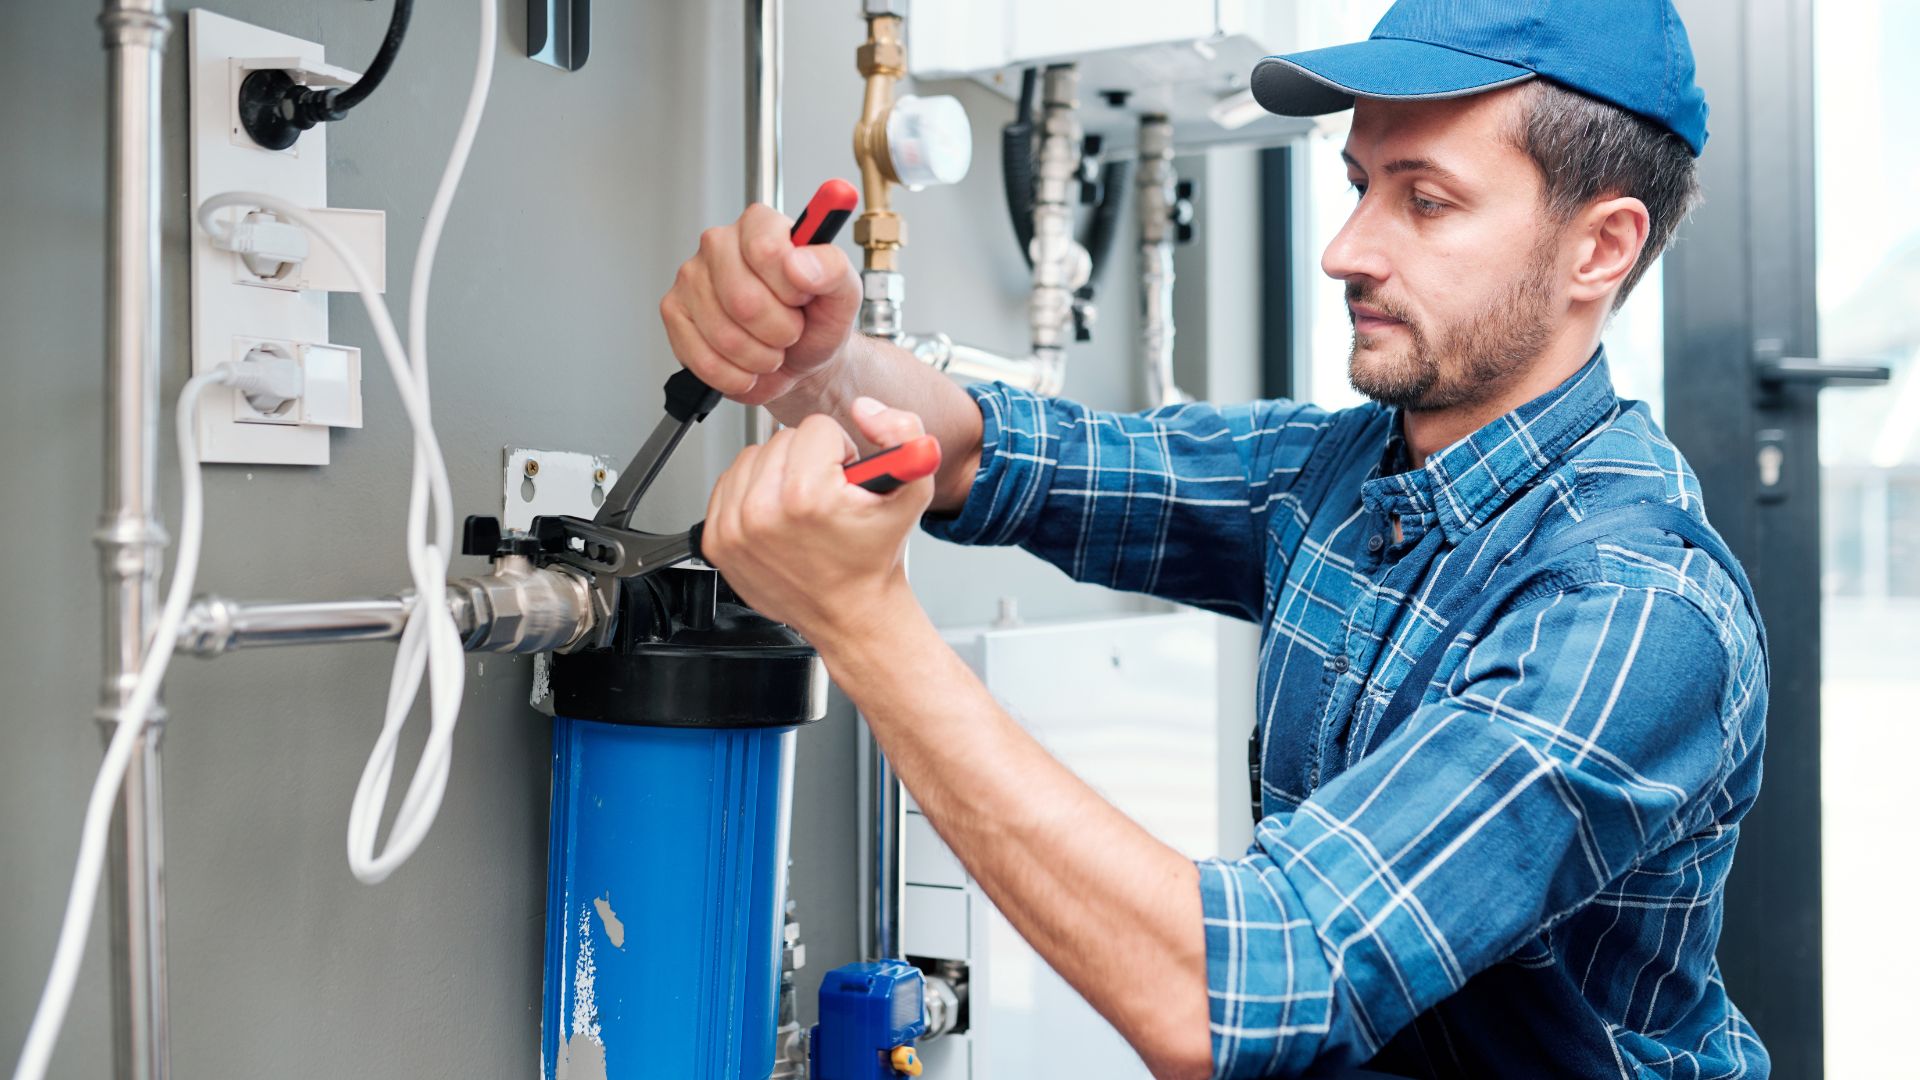 Savings on water softening systems, often requiring the skills of plumbers for installation.